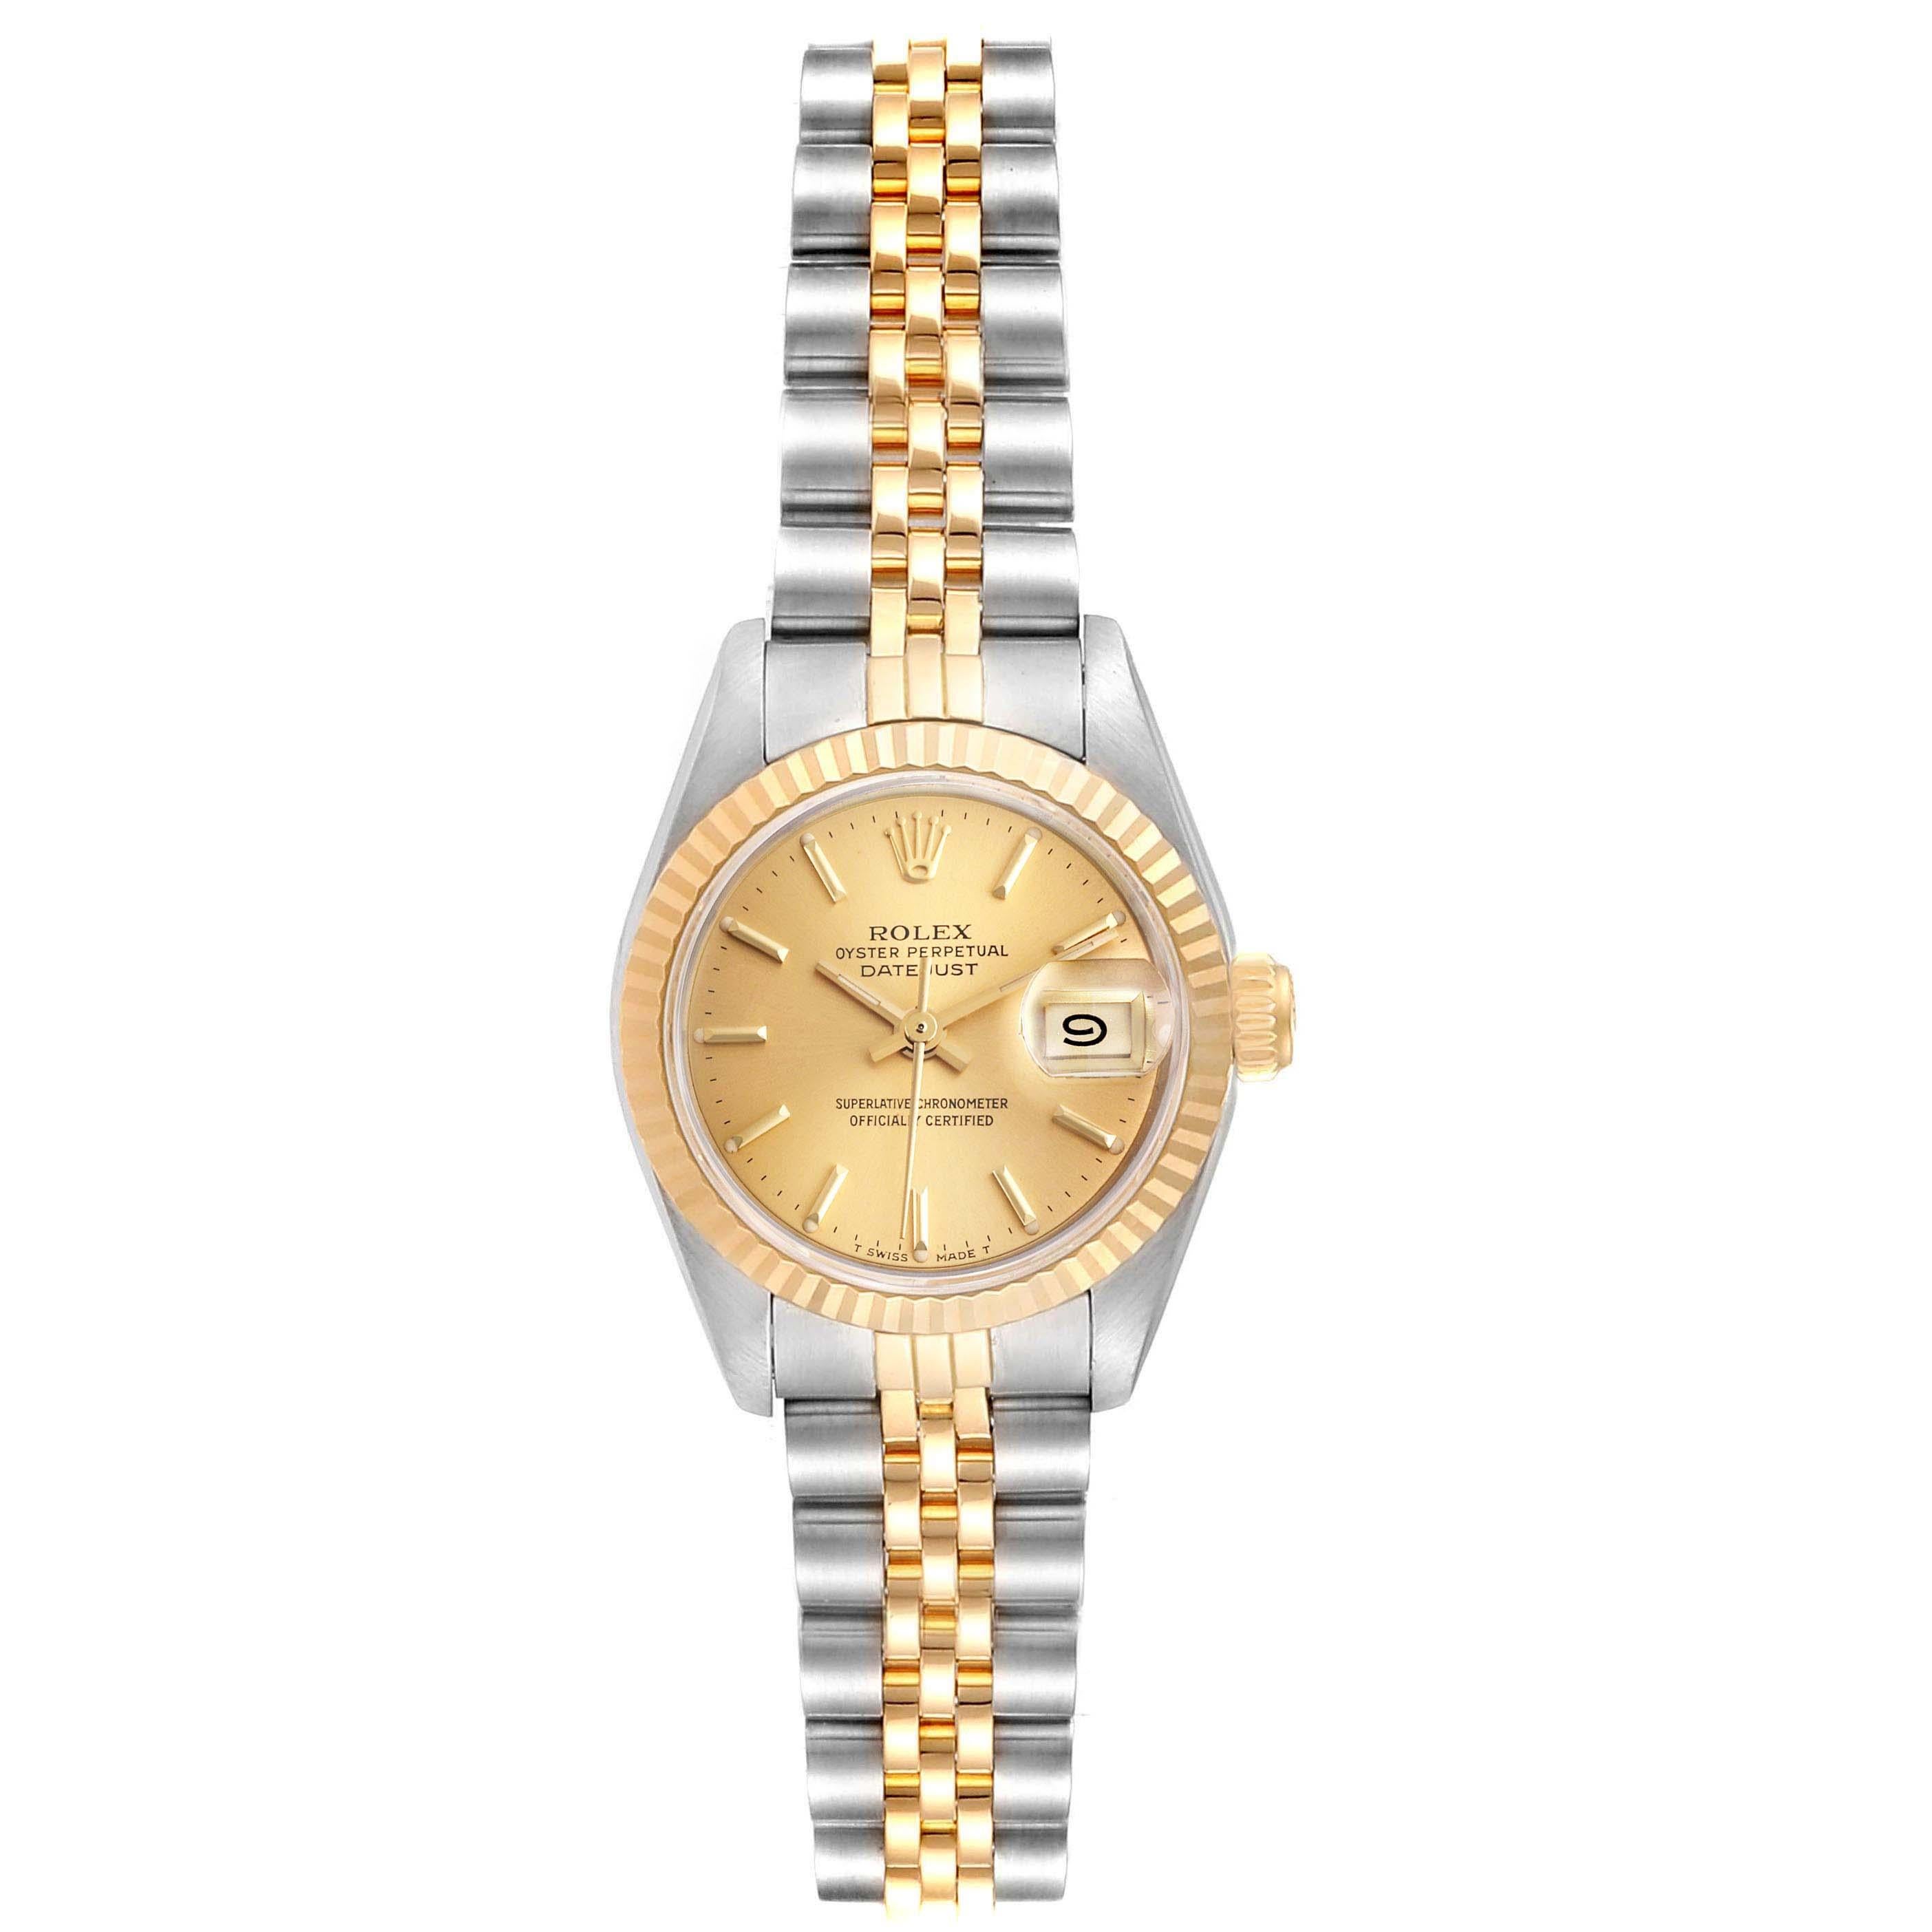 Rolex Datejust Steel Yellow Gold Jubilee Bracelet Ladies Watch 69173. Officially certified chronometer self-winding movement. Stainless steel oyster case 26.0 mm in diameter. Rolex logo on a crown. 18k yellow gold fluted bezel. Scratch resistant